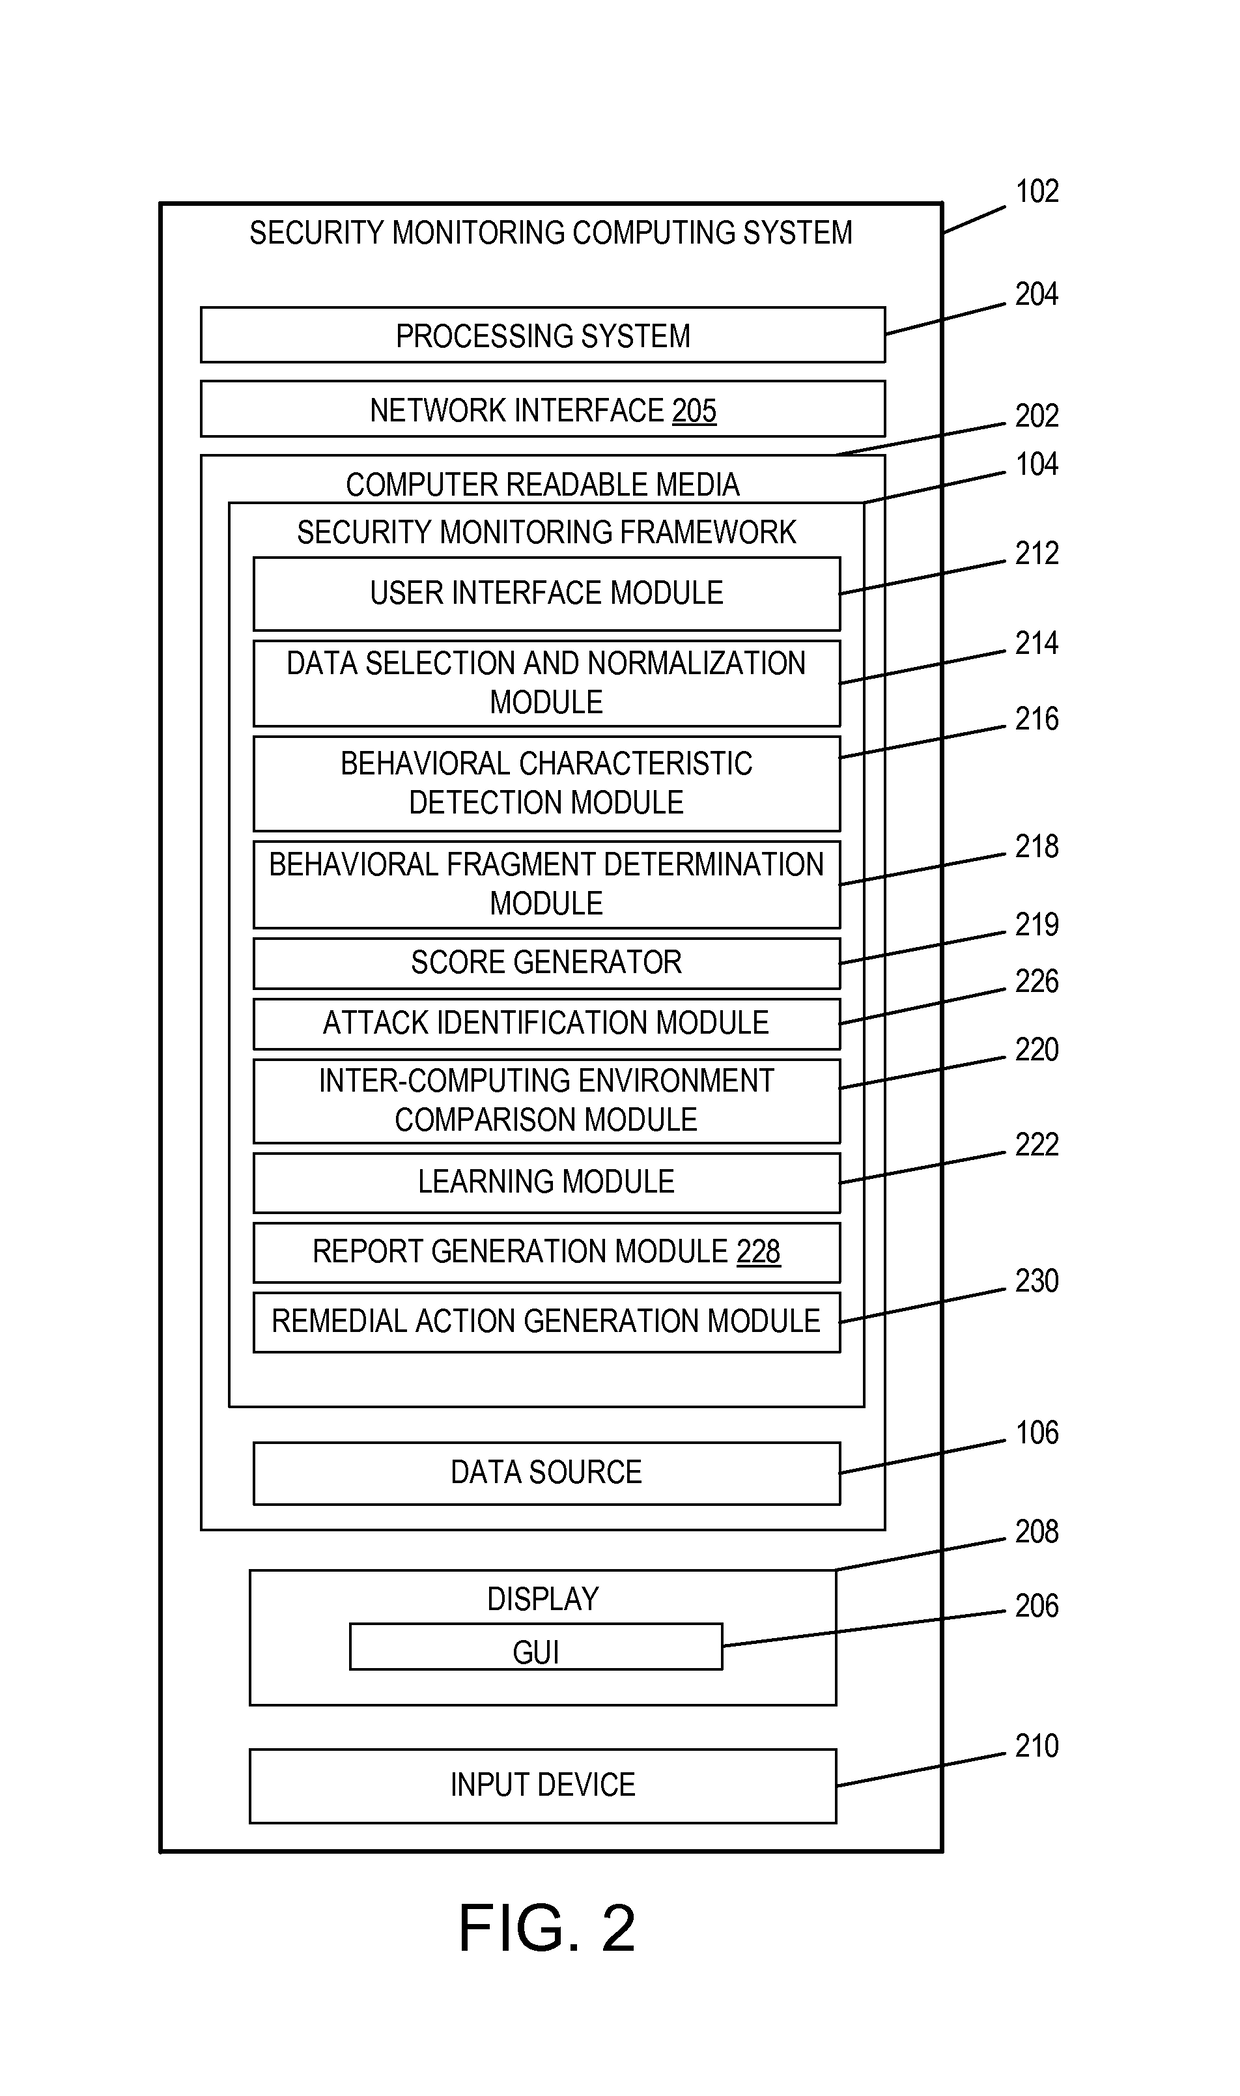 Analytics-based security monitoring system and method